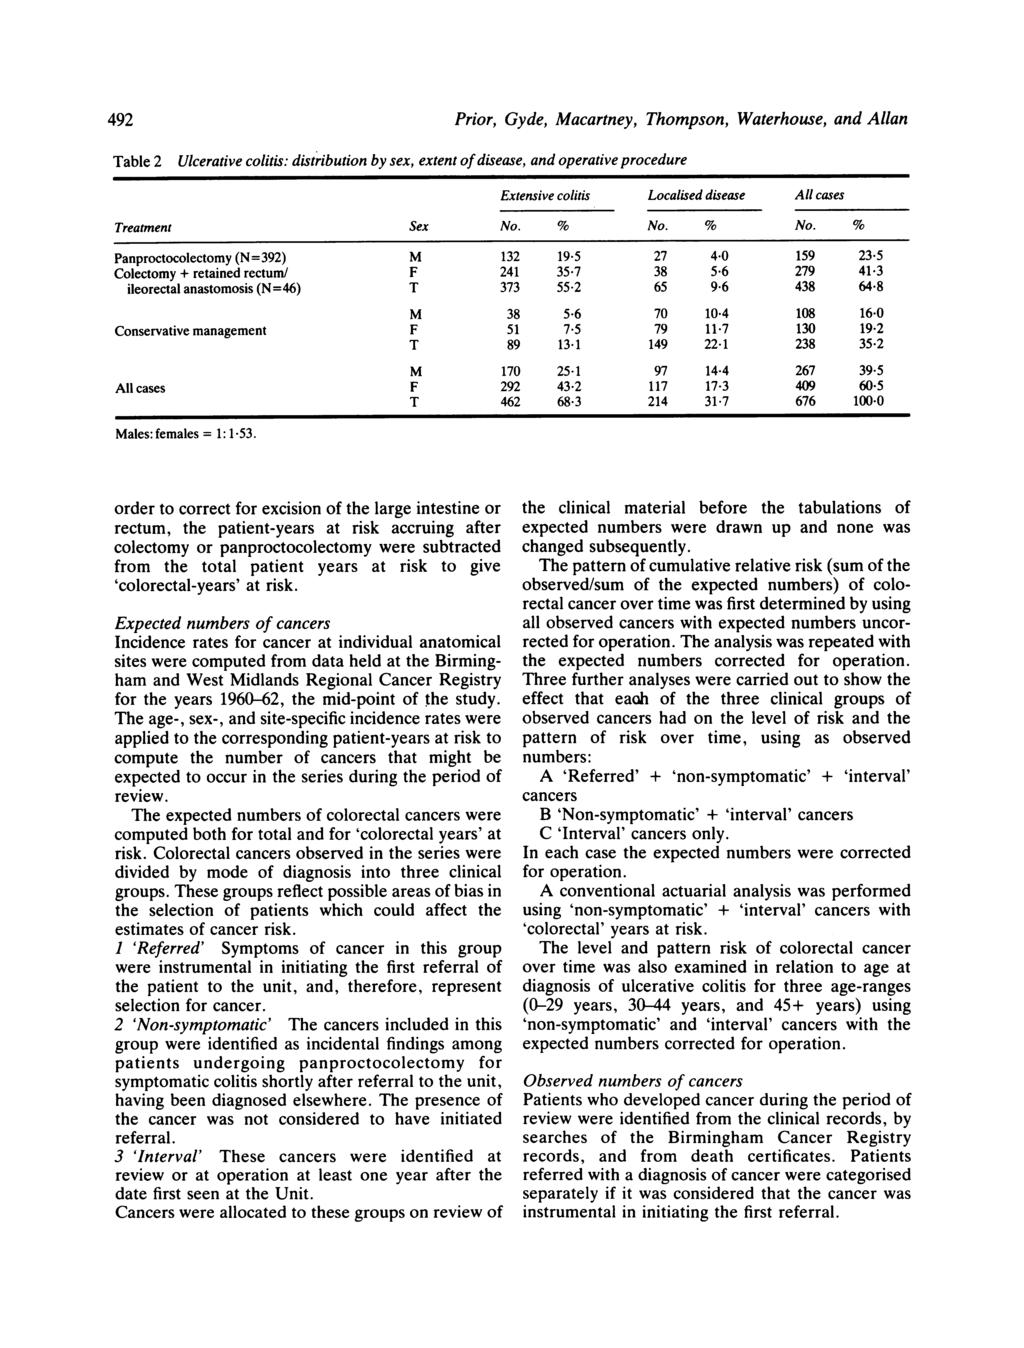 492 able 2 Pror, Gyde, acartney, hompson, Waterhouse, and Allan Ulceratve colts: dstrbuton by sex, extent of dsease, and operatve procedure Extensve colts Localsed dsease All cases reatment Sex No.